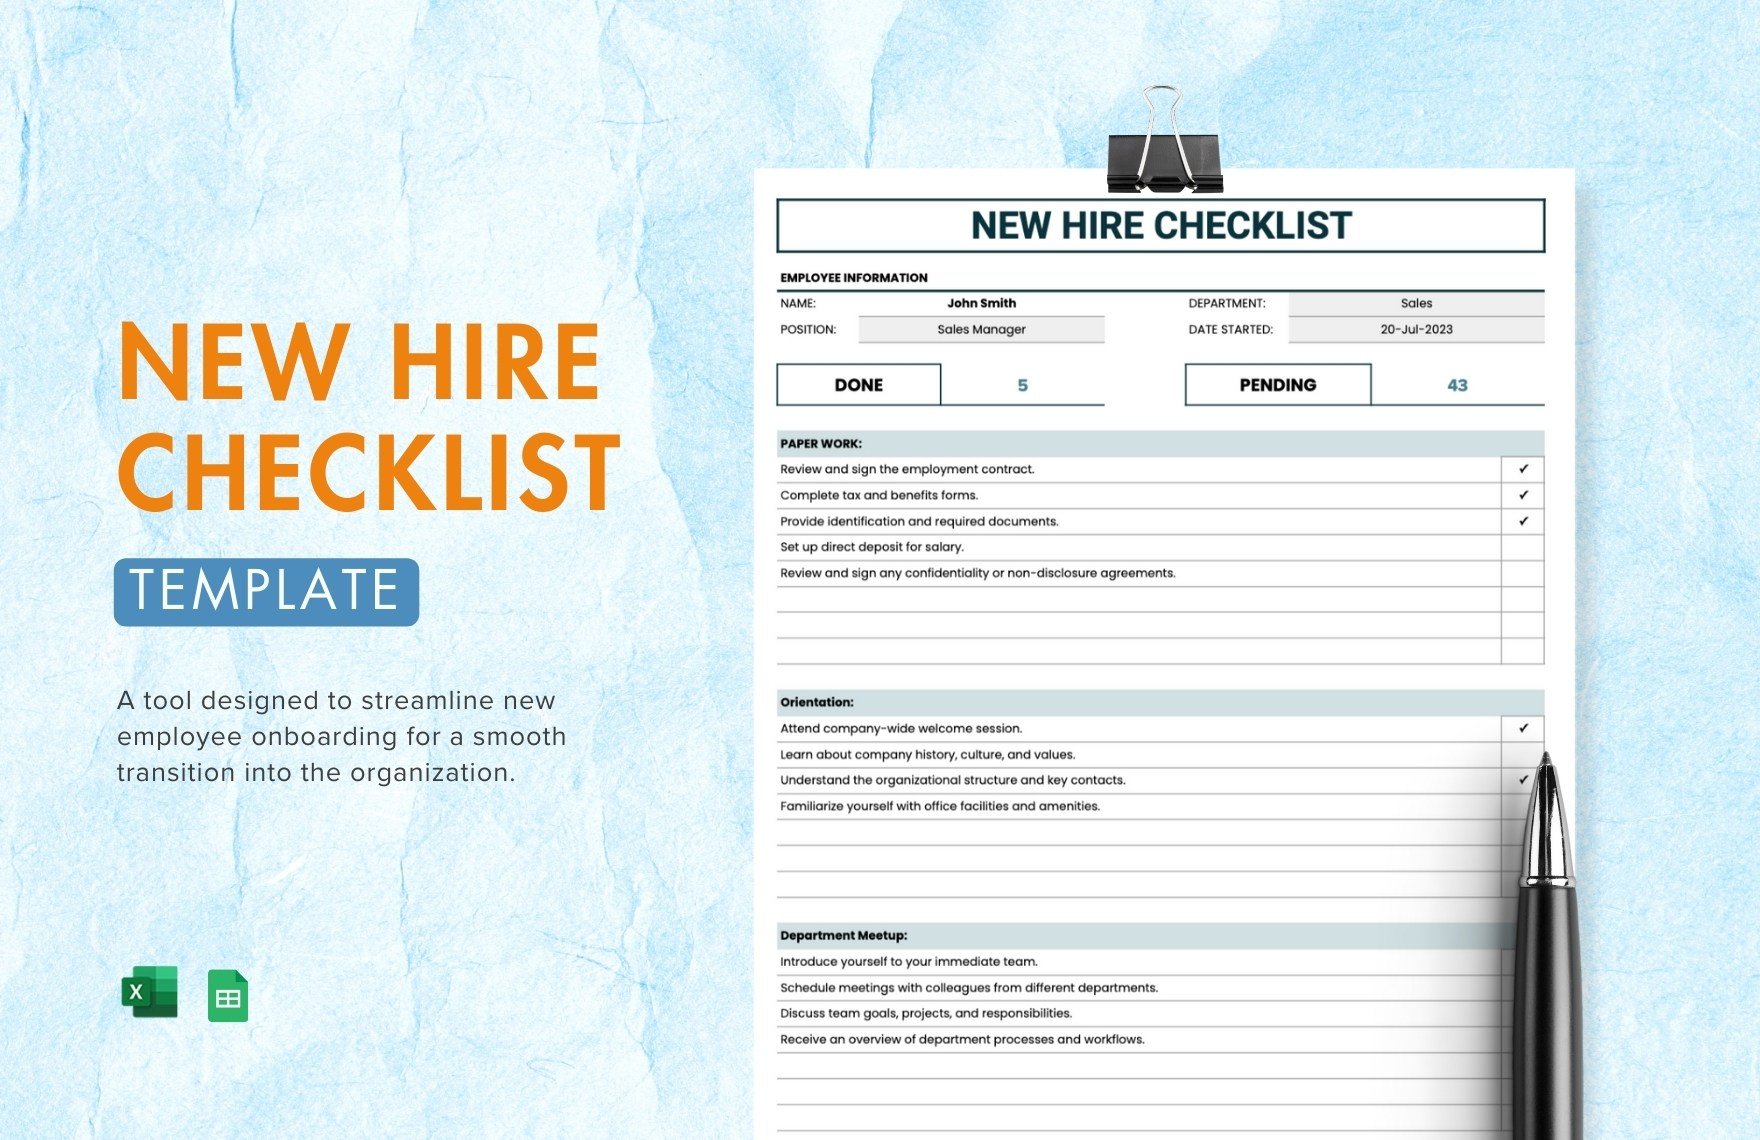 Free New Hire Checklist Template in Excel, Google Sheets